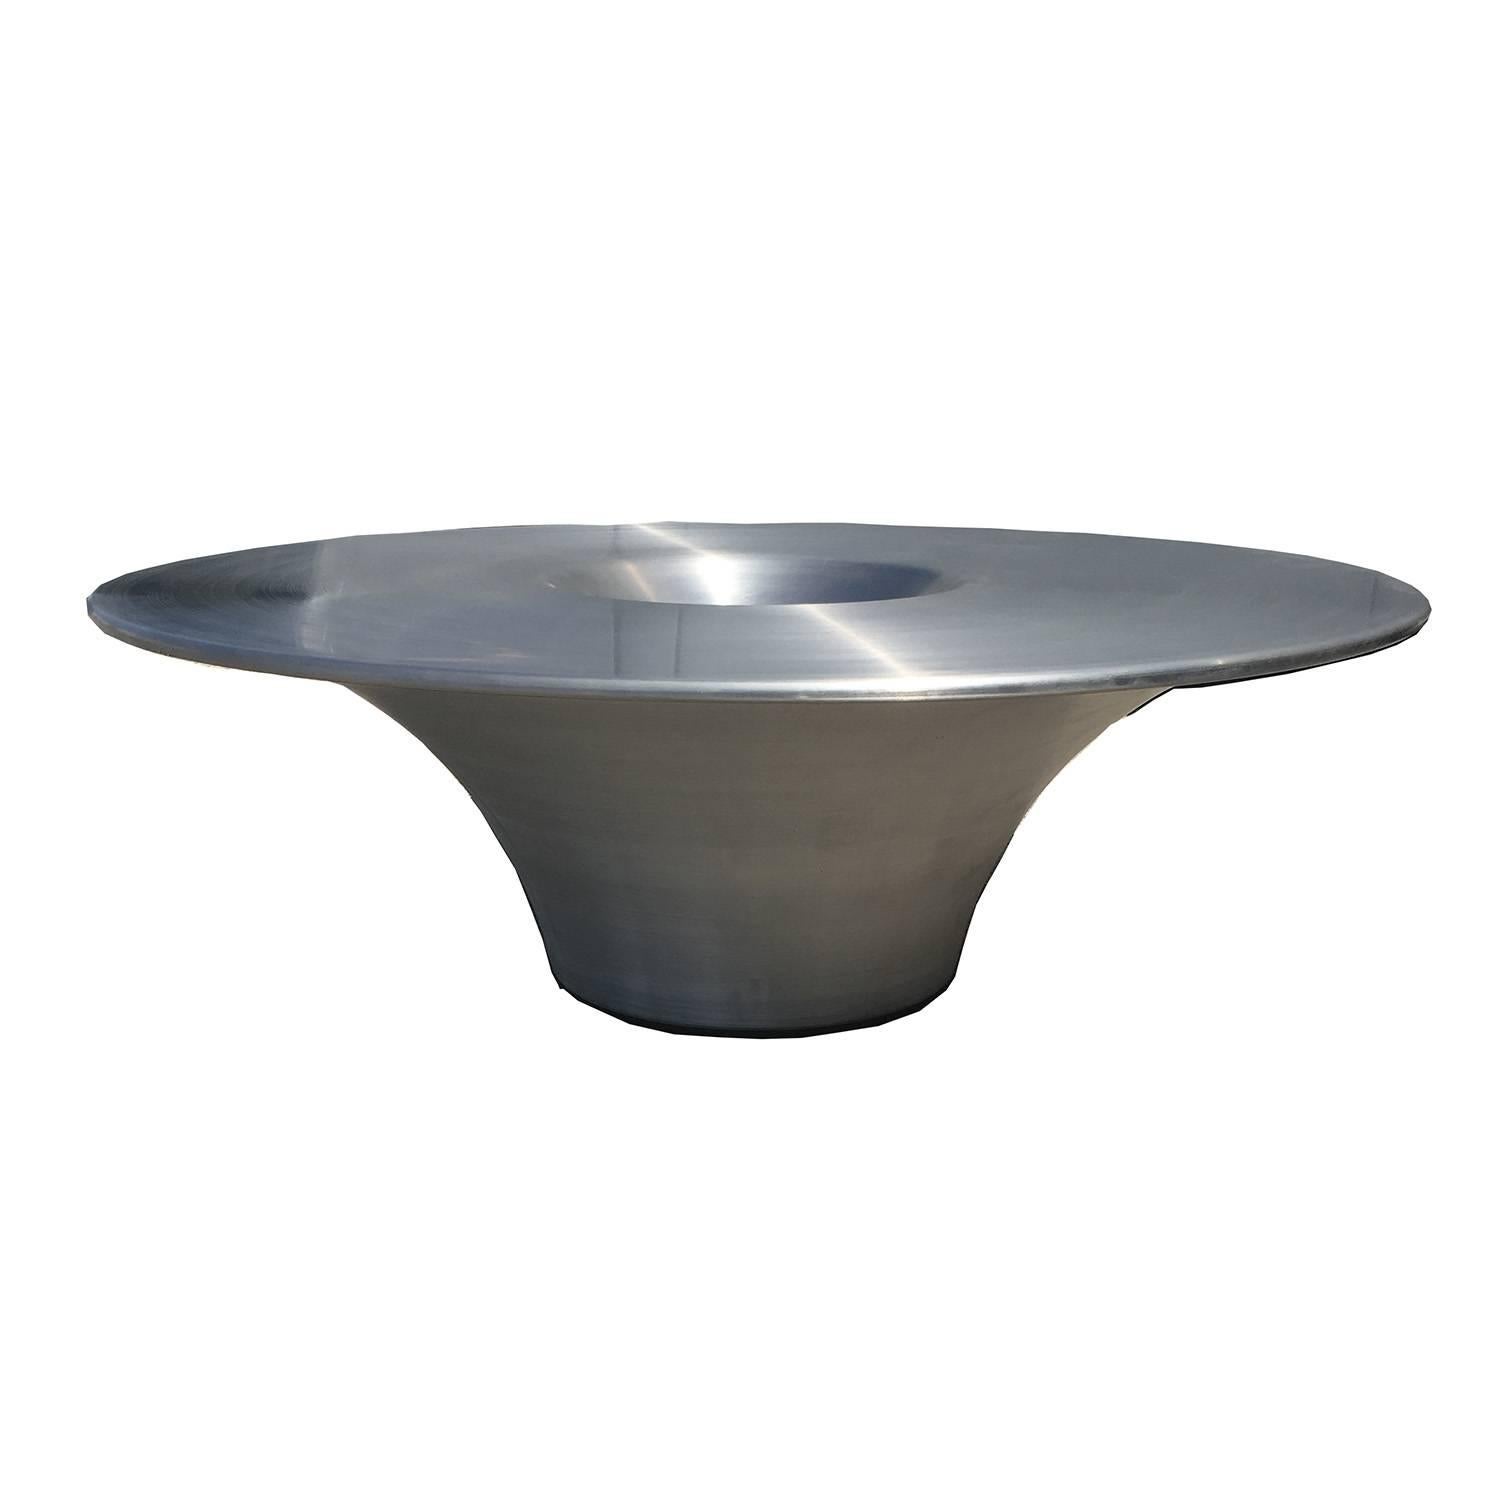 RETIREMENT SALE!!!  EVERYTHING MUST GO - CHECK OUT OUR OTHER ITEMS.

Created in the 1990s, this marvellous table references alien space craft with its' futuristic design. Of special note is the inset centre, as a catch all functional centre or chips